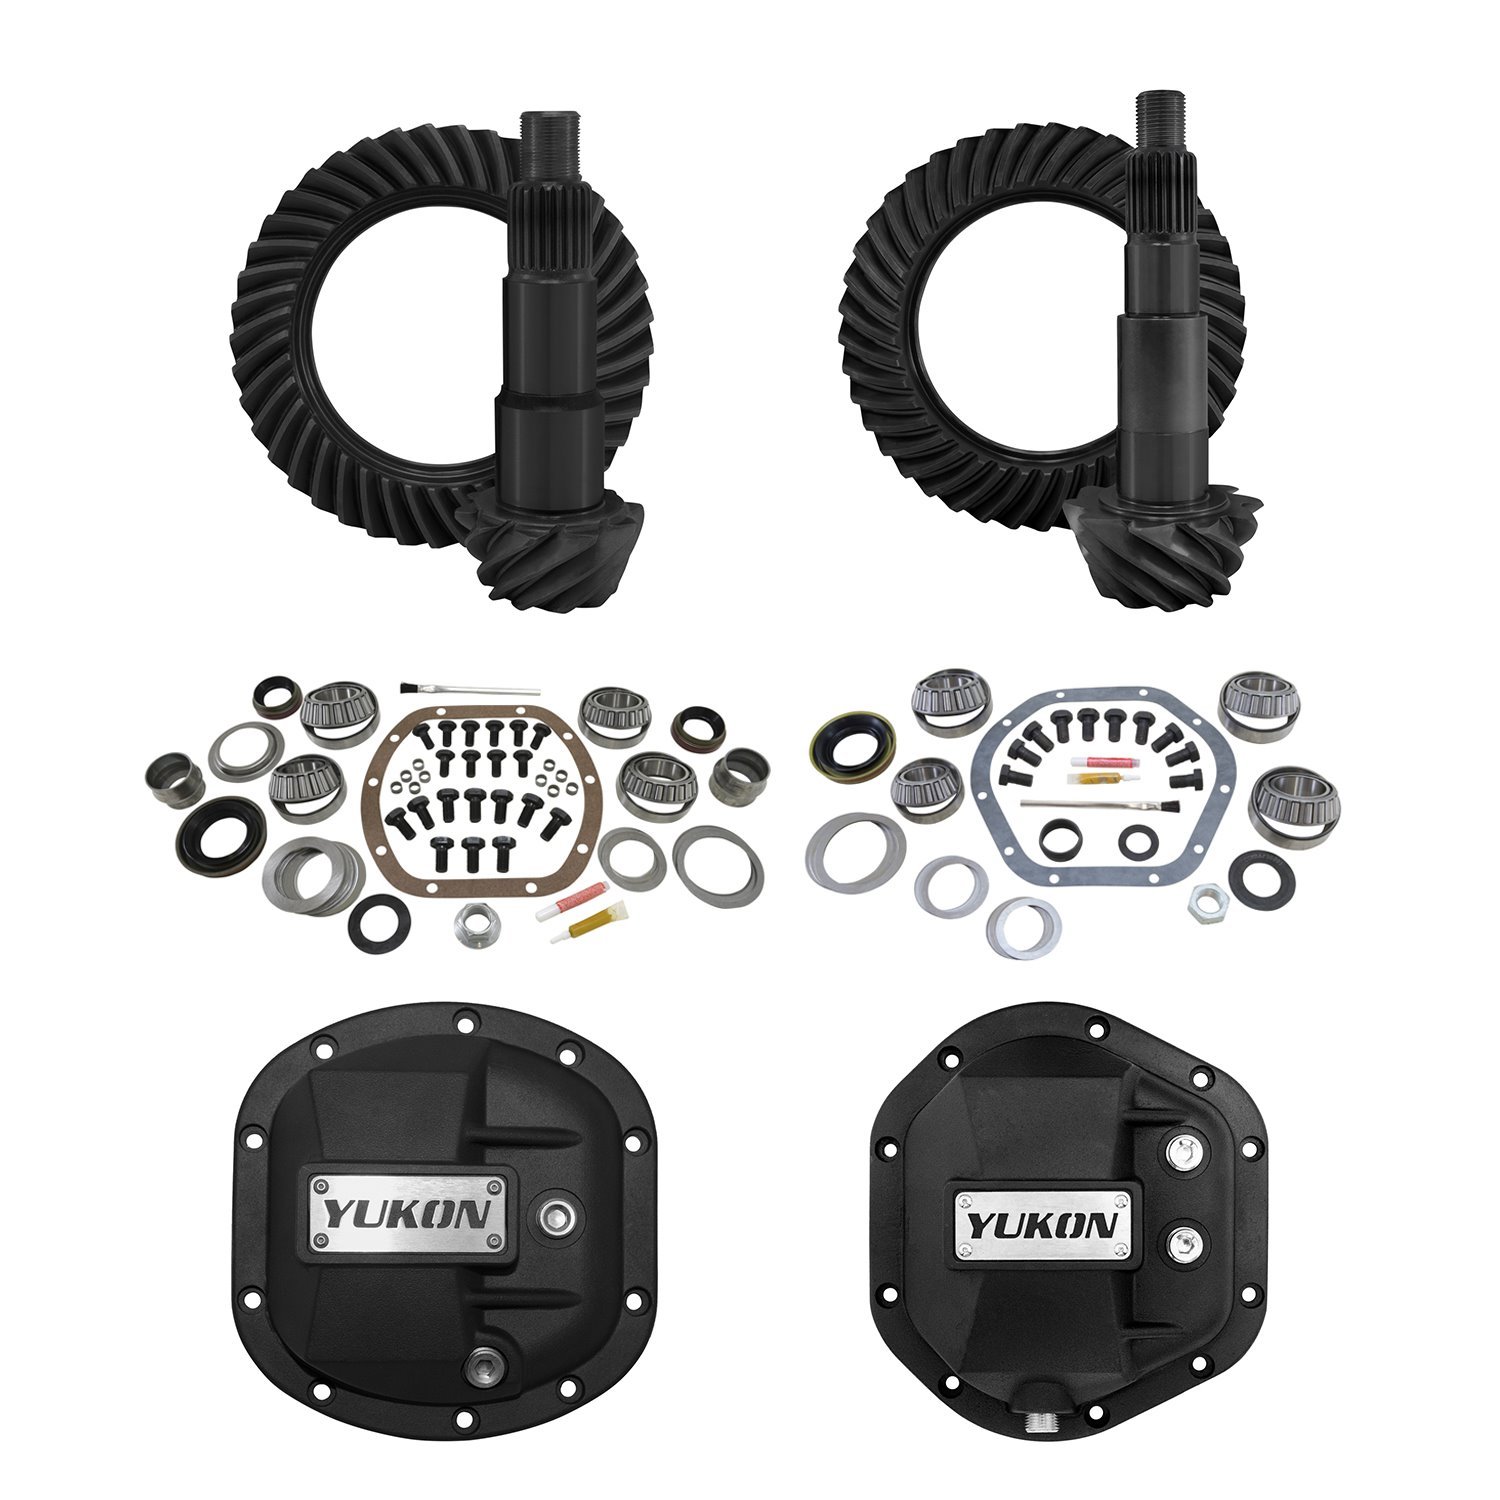 Stage 2 Jeep Jk Re-Gear Kit, W/Diff Covers